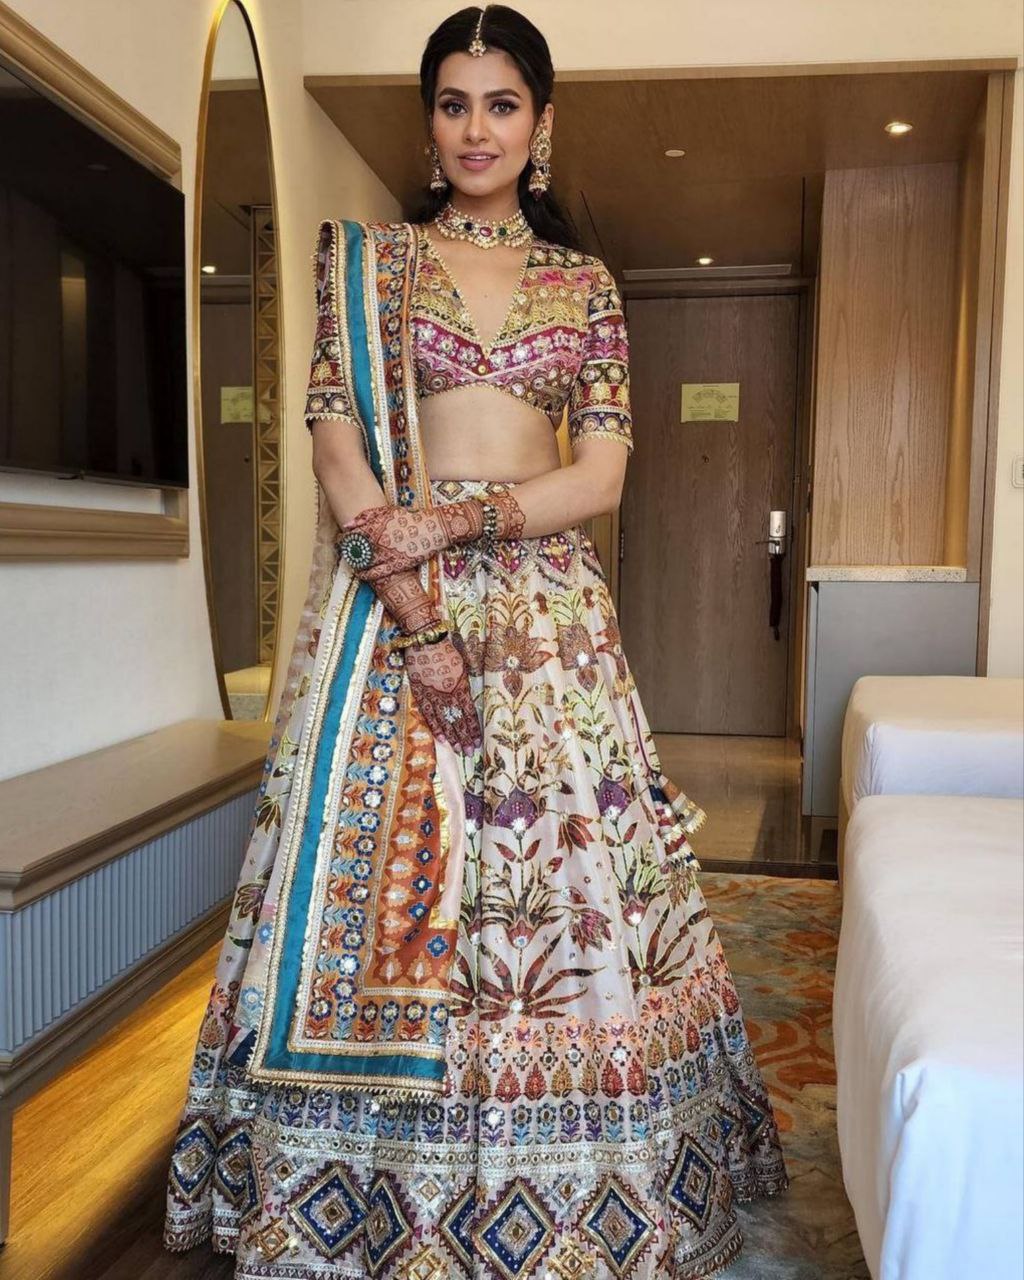 From Dupattas to Capes - Different ways to style your Lehenga Dress